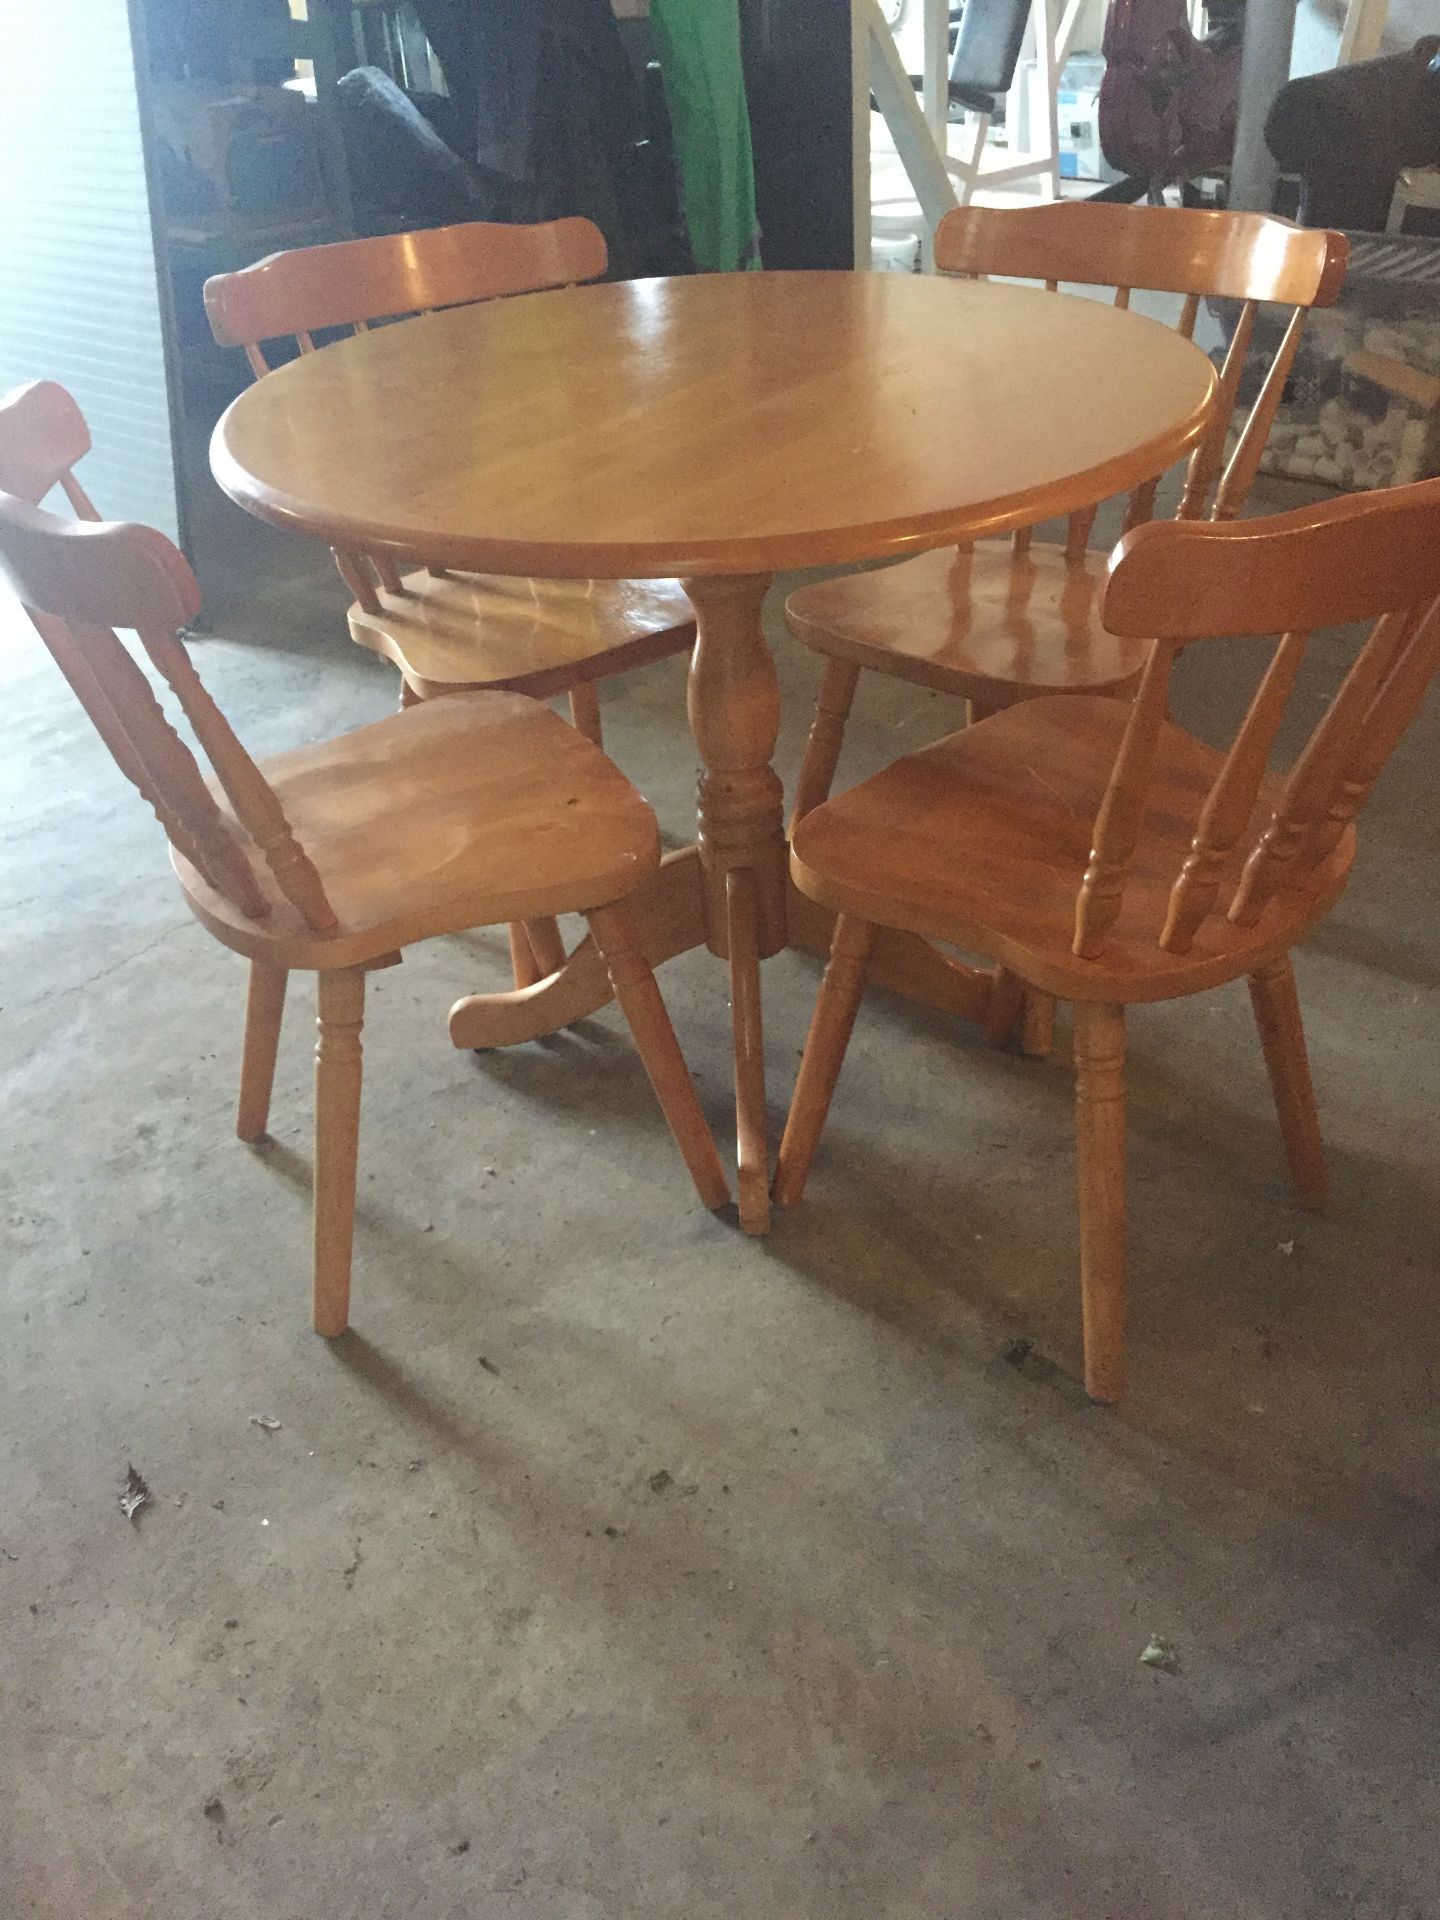 SOLID PINE ROUND DINING TABLE AND FOUR CHAIRS  BEEN IN THE SAME HOUSE SINCE NEW  GOOD CONDITION WITH - Image 3 of 6